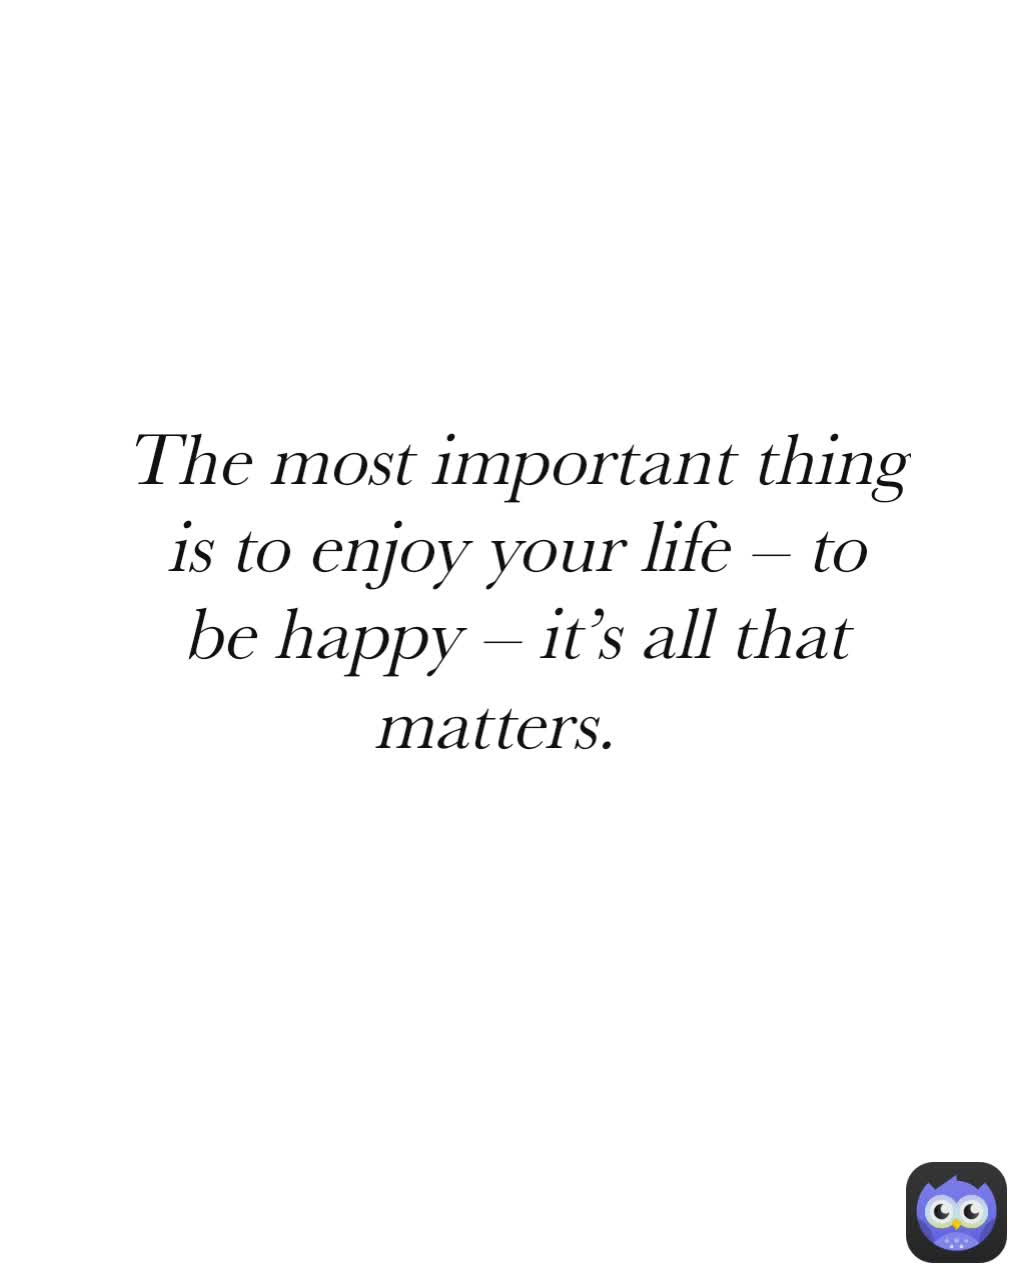 The most important thing is to enjoy your life – to be happy – it’s all that matters.